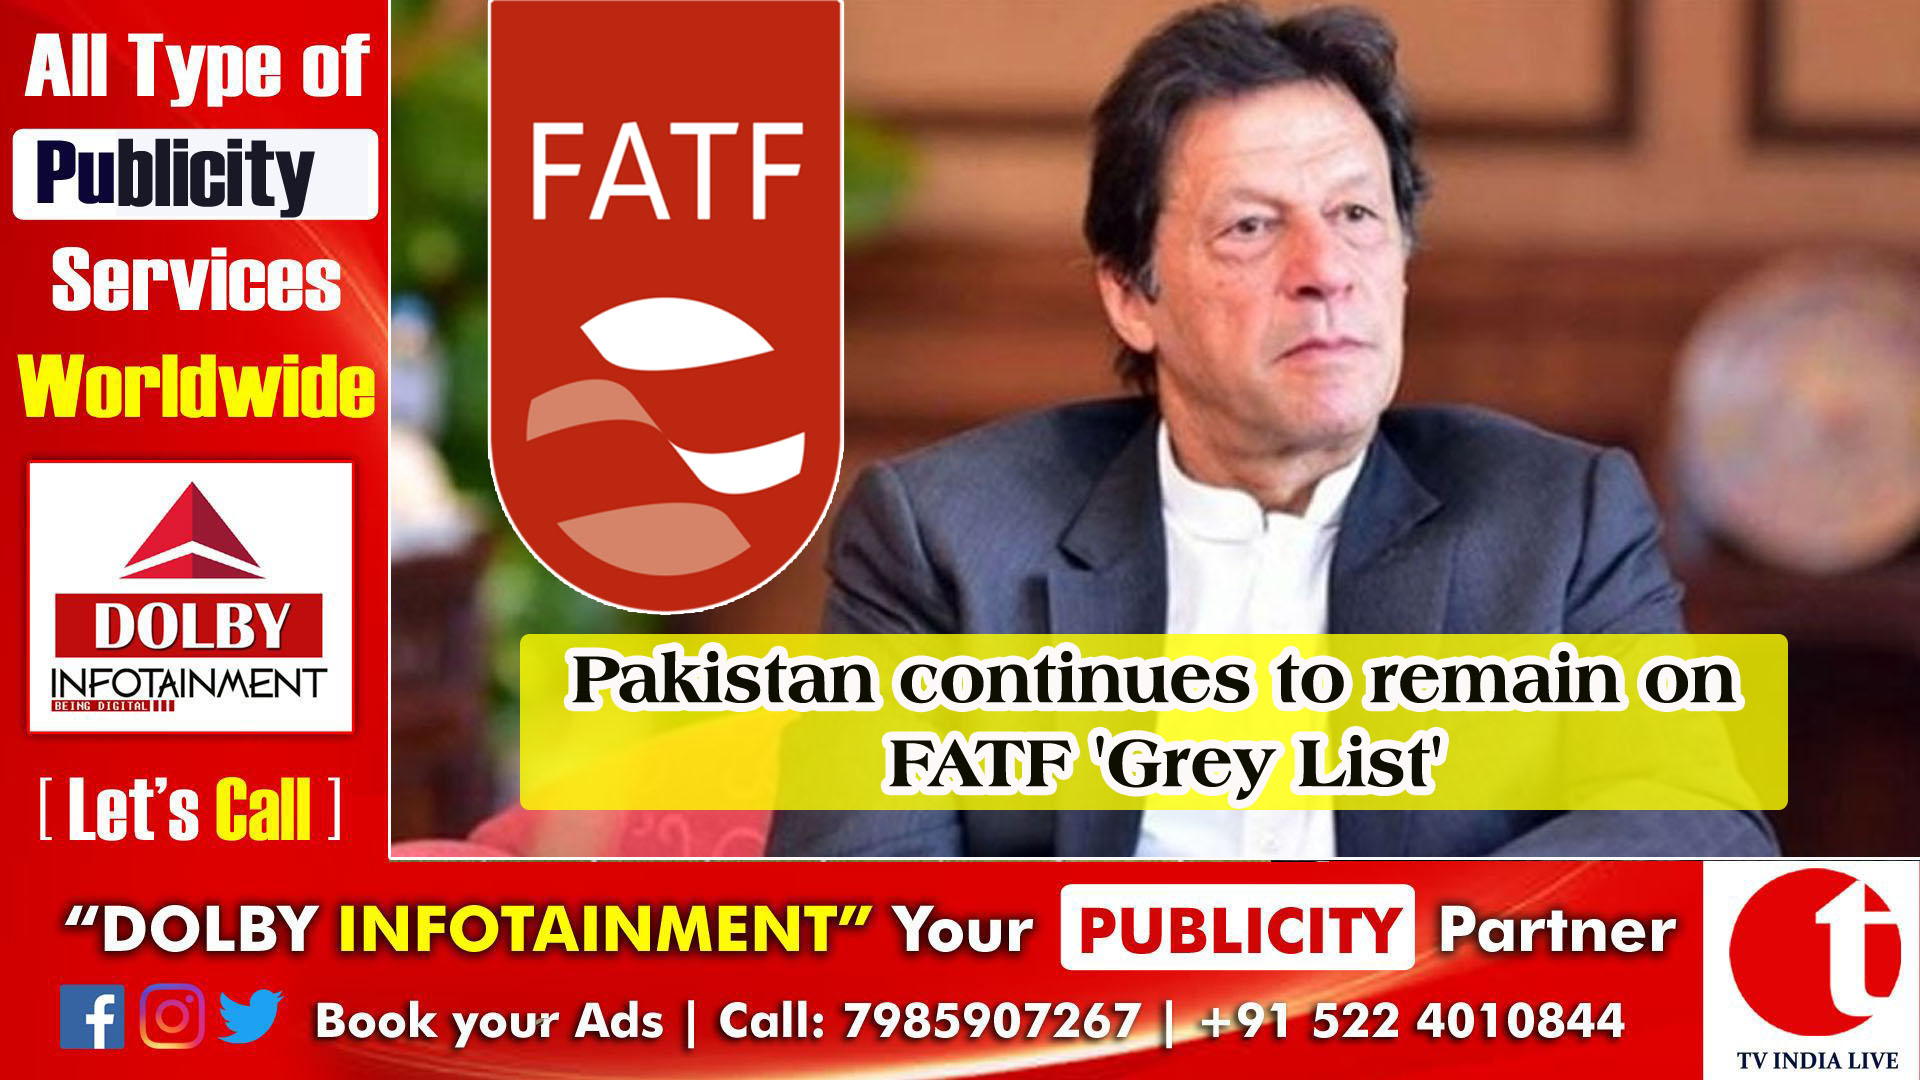 Pakistan continues to remain on FATF 'Grey List'